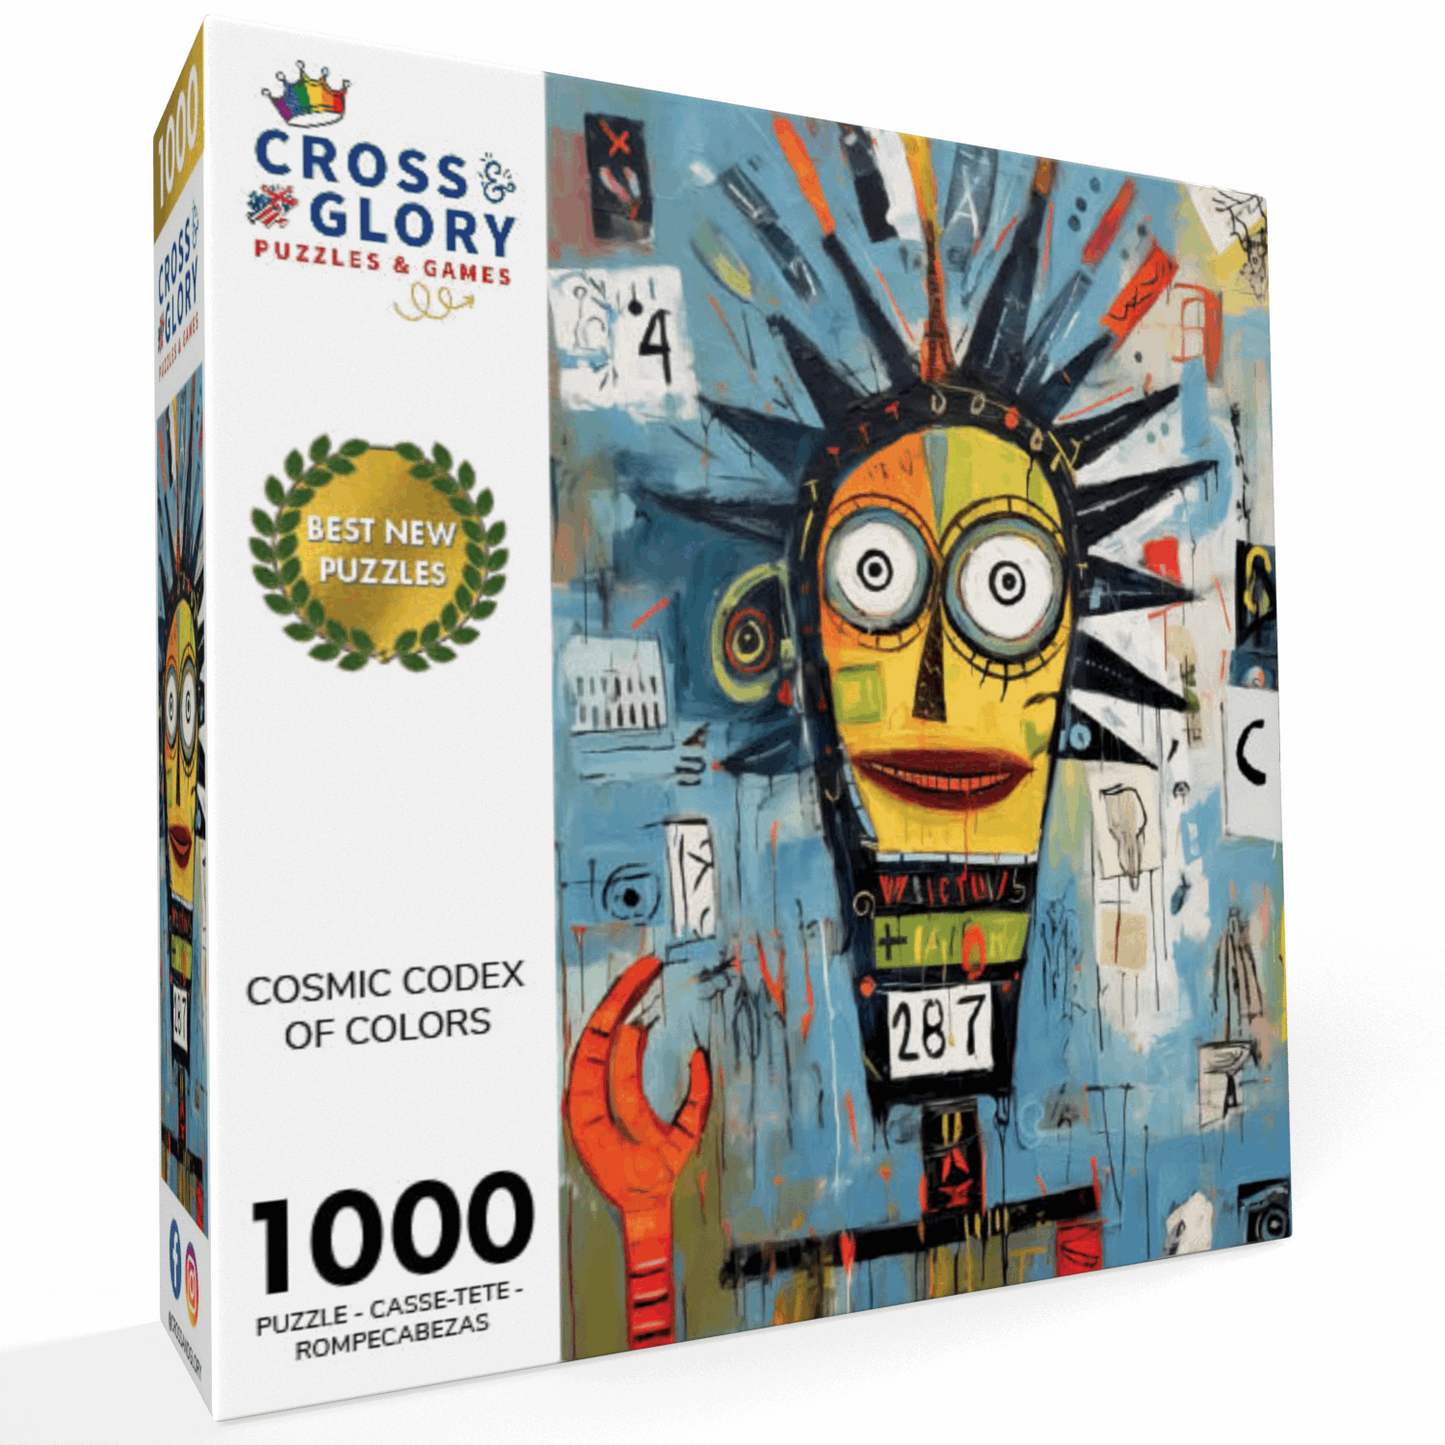 Cosmic Codex of Colors - 1000 Piece Jigsaw Puzzle